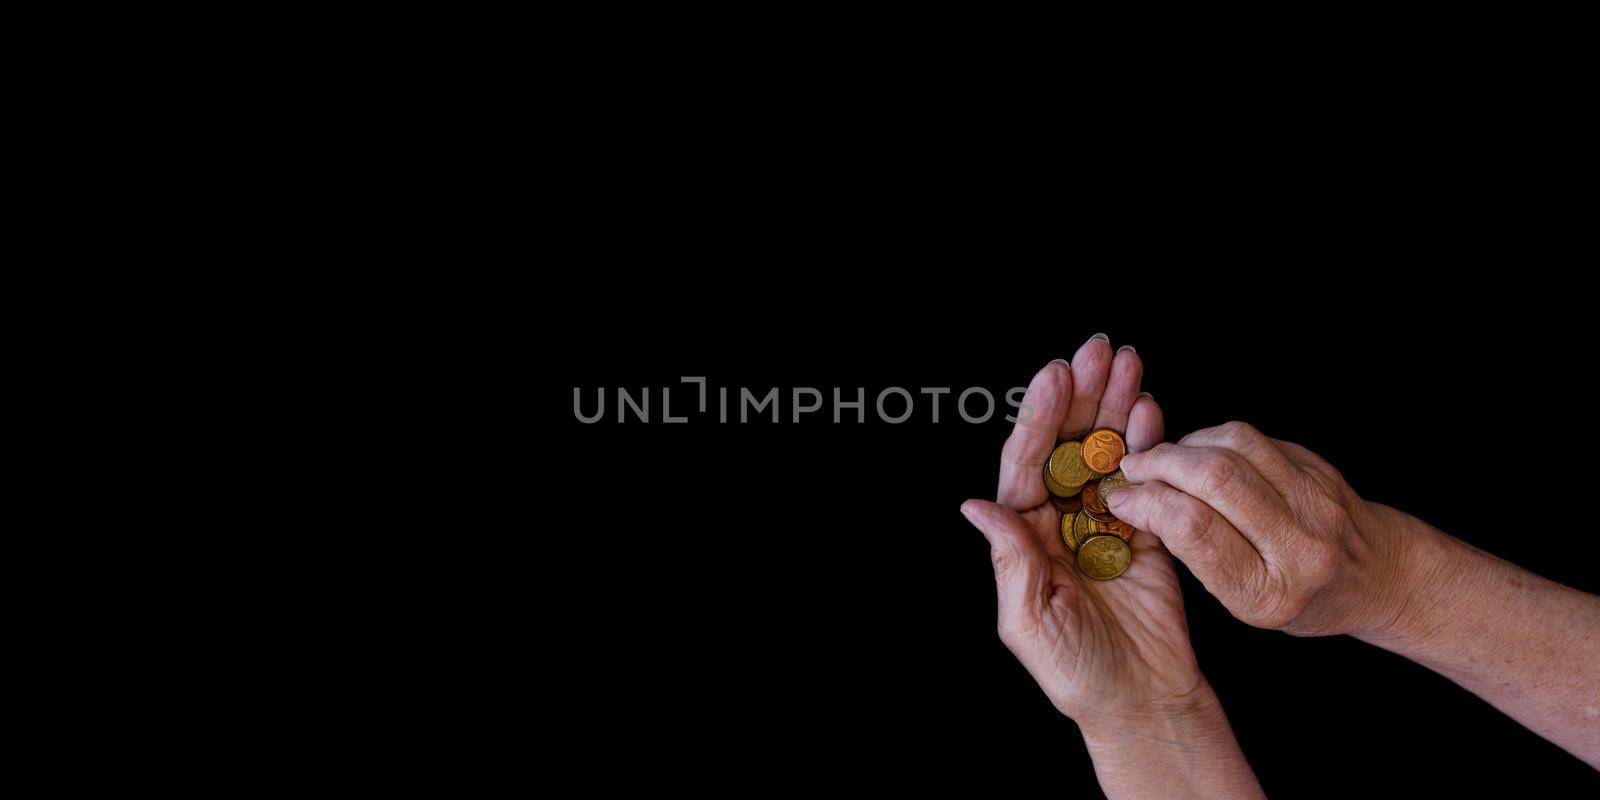 Big banner, black background with copy paste. The hands of an elderly woman with arthritis count coins in her hands. The concept of poverty, benefits for the elderly, old age